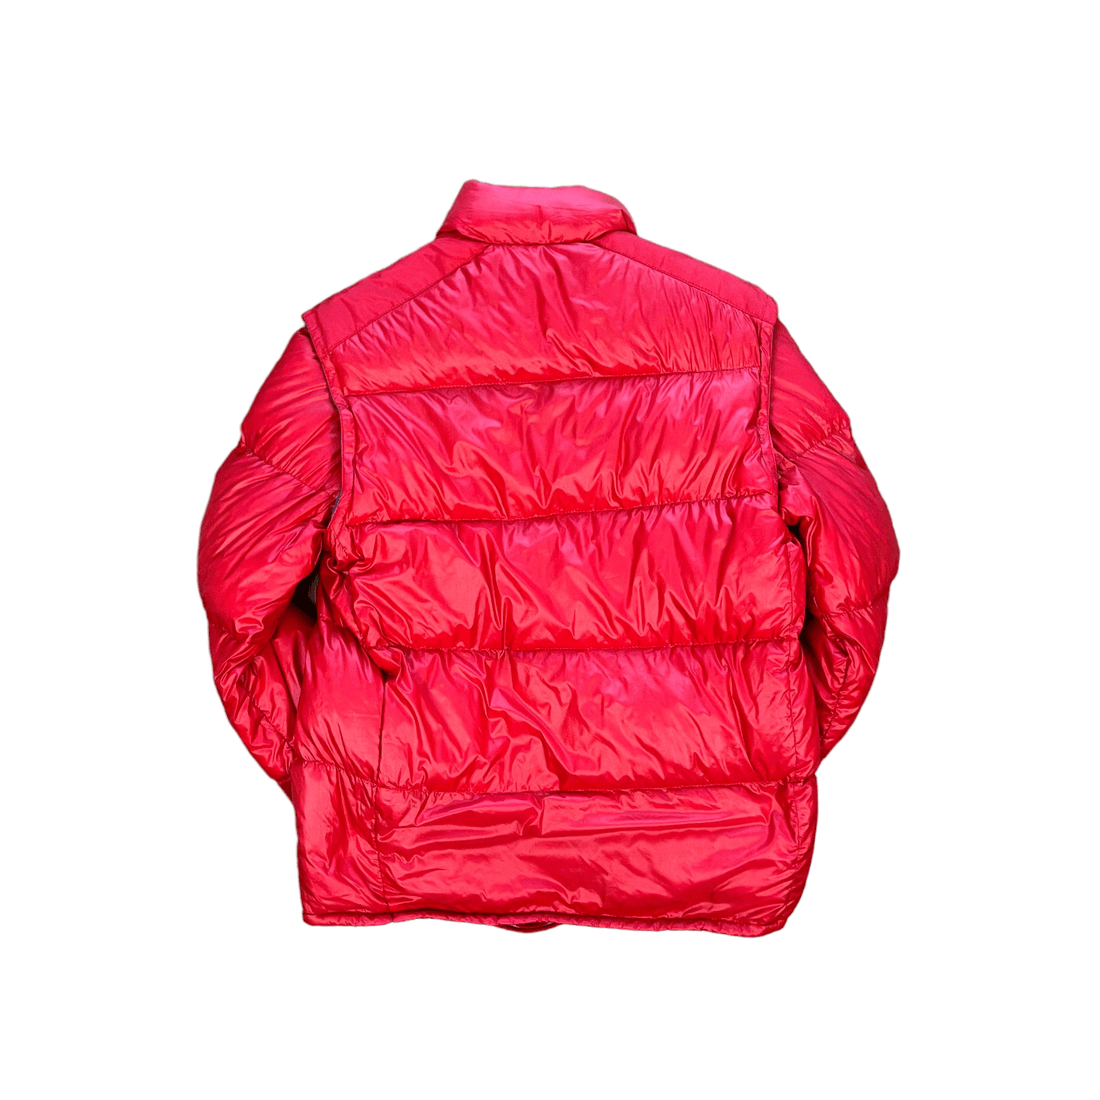 Vintage 90s Red Moncler Grenoble Puffer Coat - Small - The Streetwear Studio